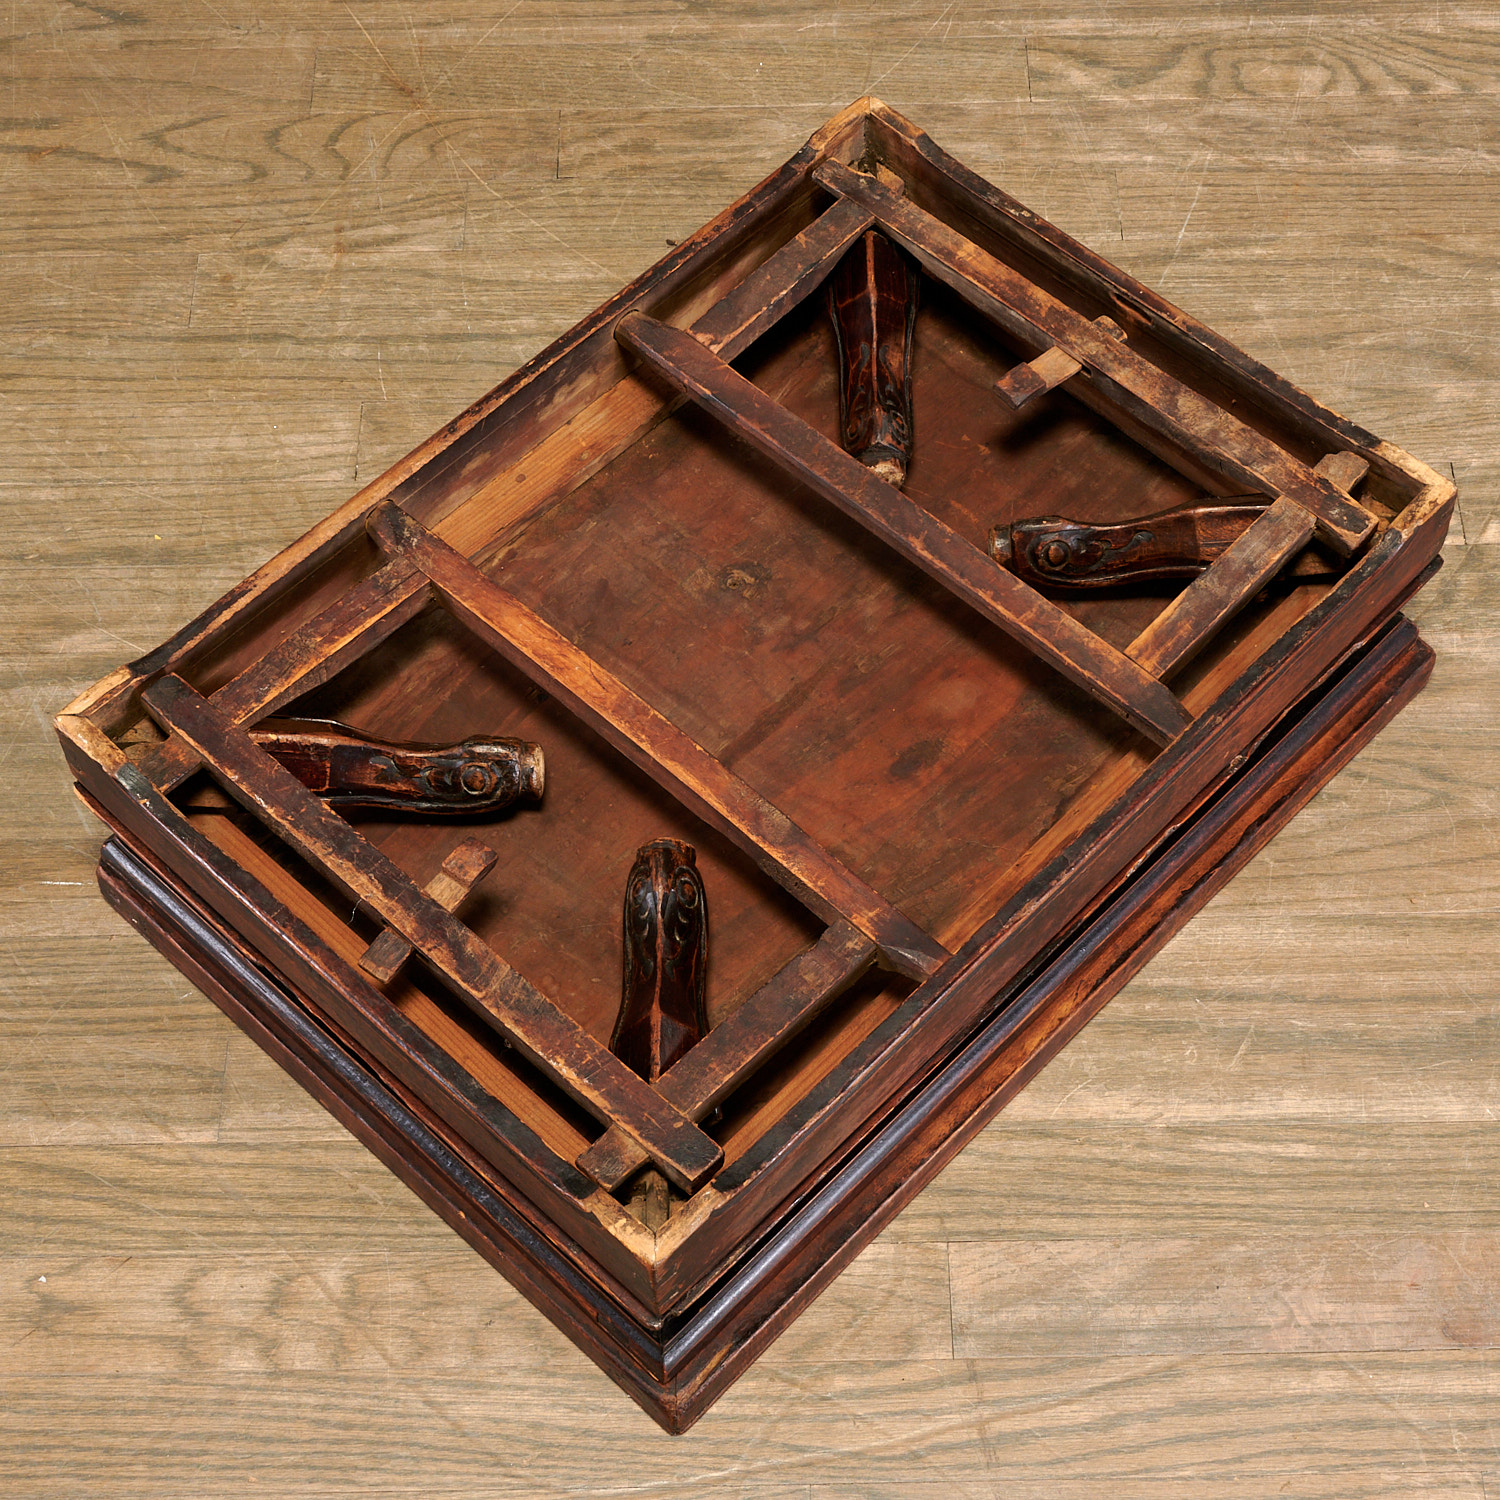 Unusual Chinese hardwood traveling scholar's table - Image 7 of 8